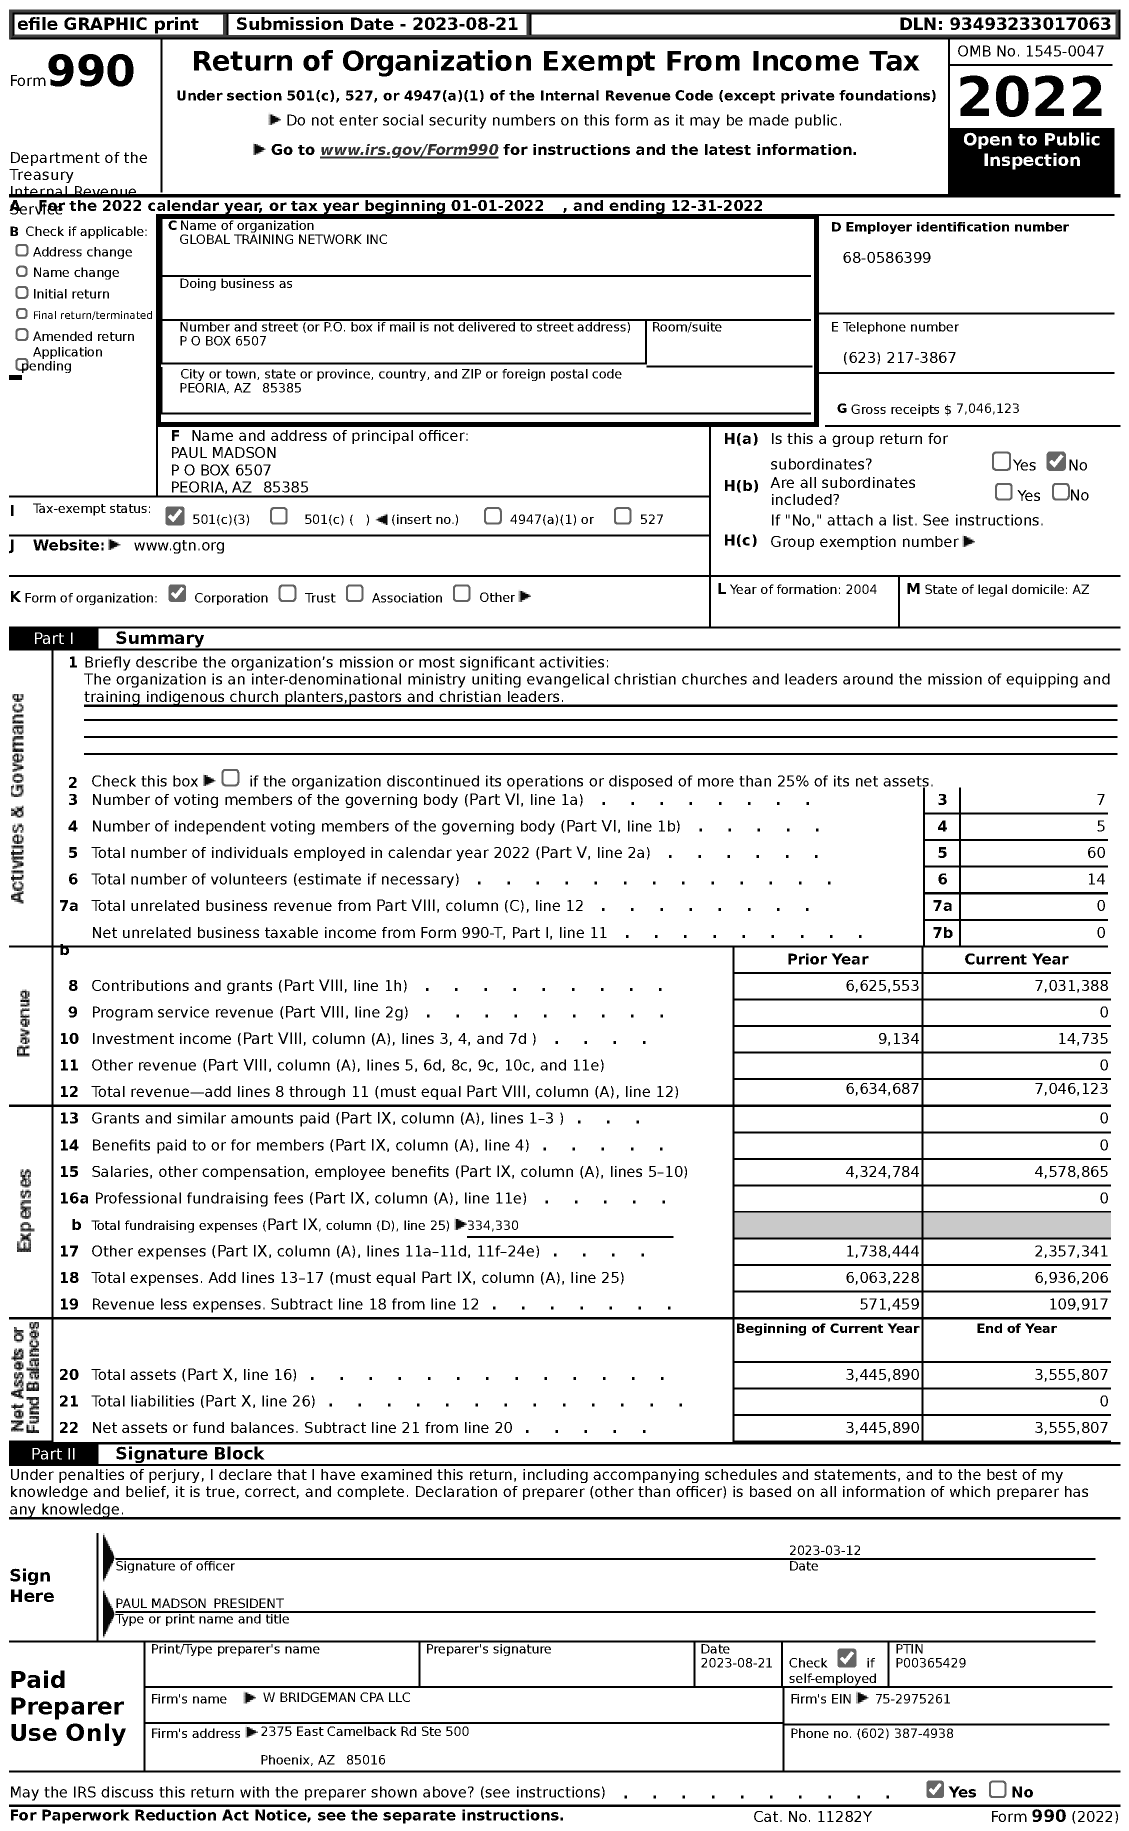 Image of first page of 2022 Form 990 for Global Training Network